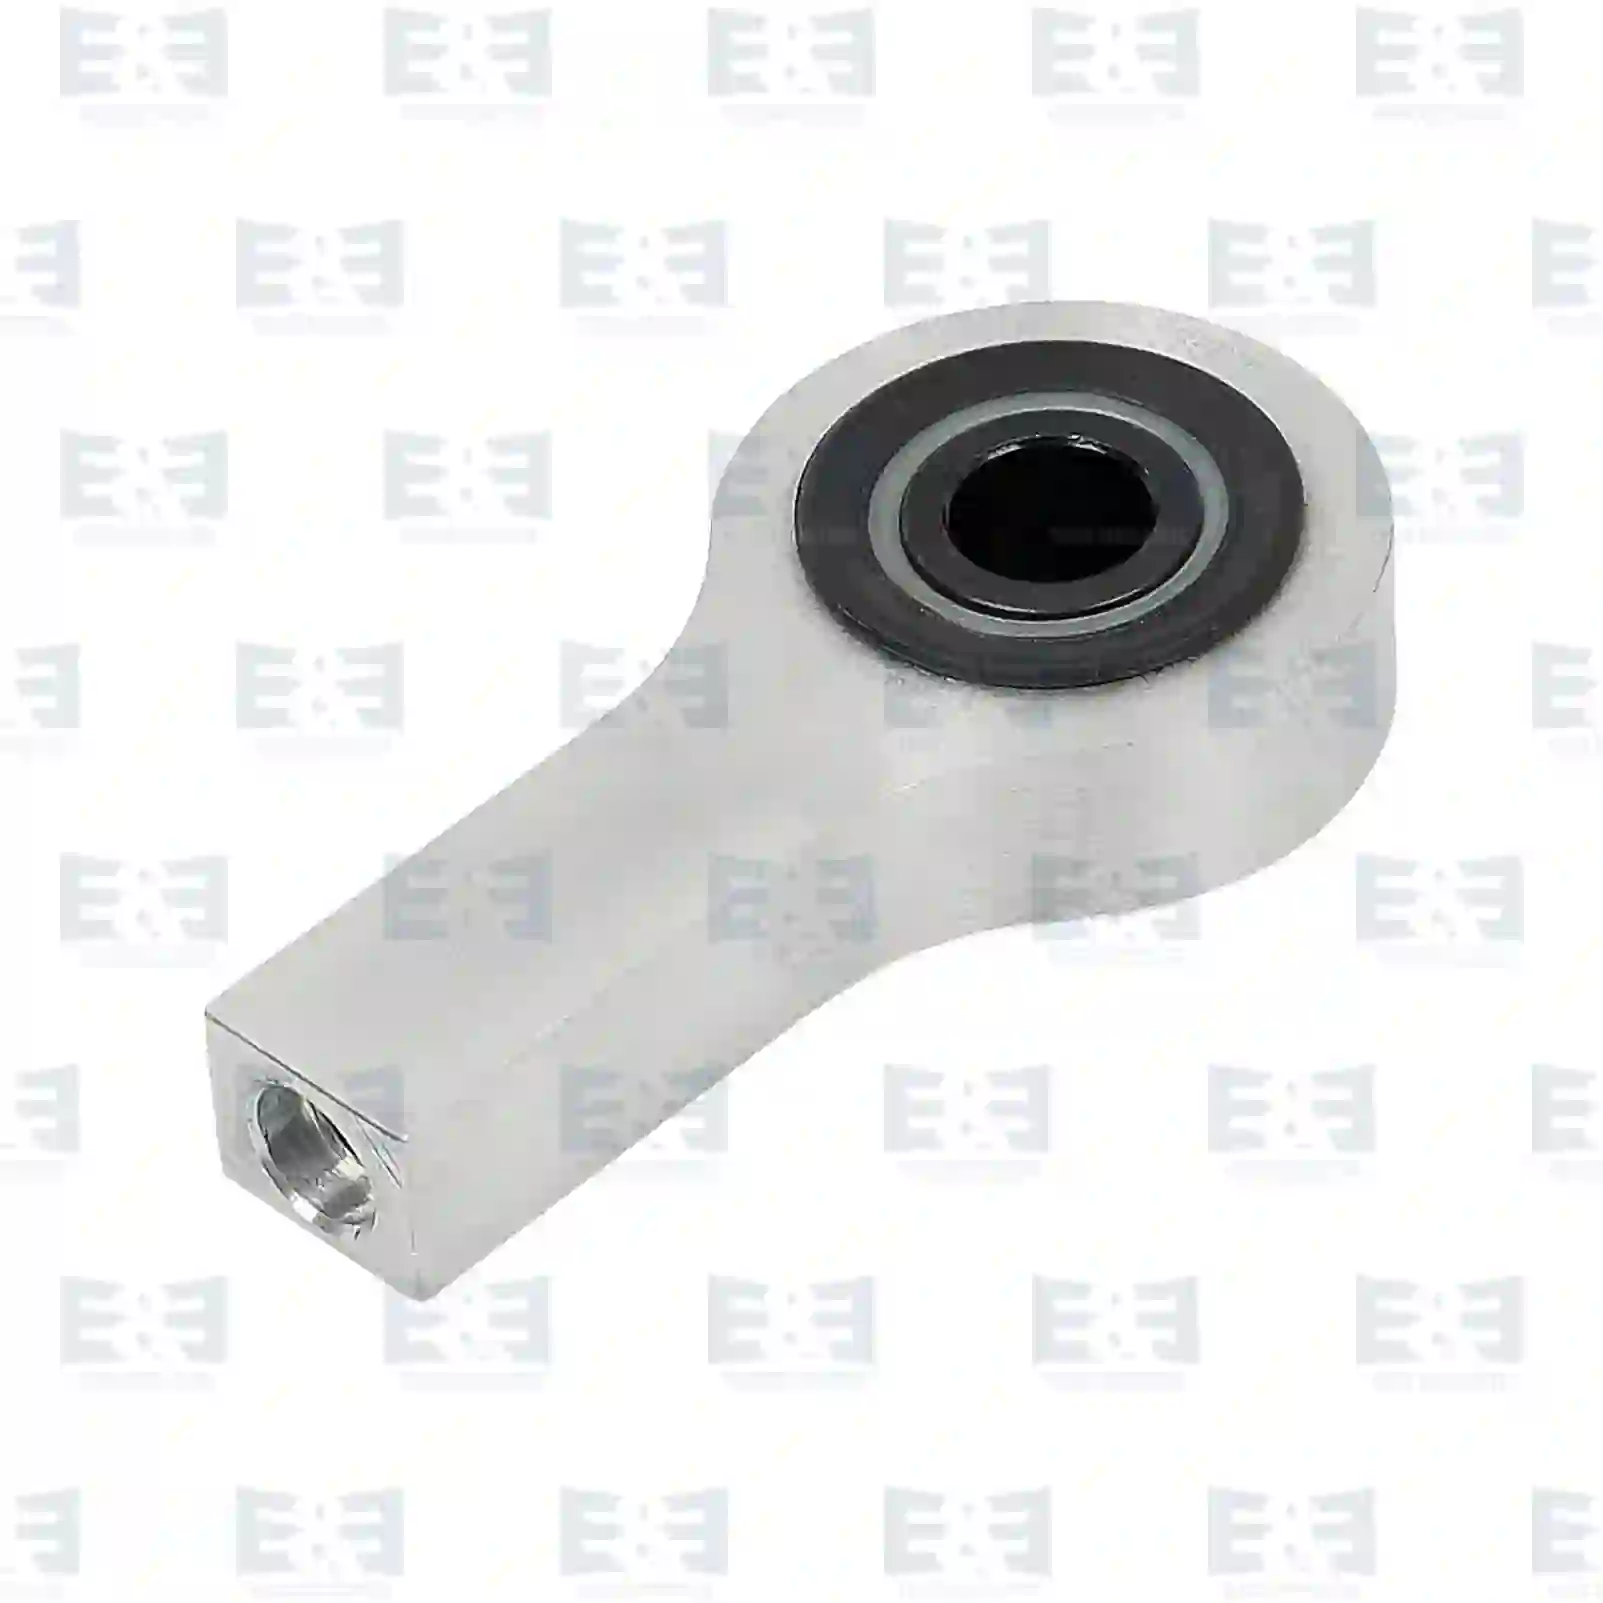 Bearing joint, cabin shock absorber, 2E2275135, 2109766 ||  2E2275135 E&E Truck Spare Parts | Truck Spare Parts, Auotomotive Spare Parts Bearing joint, cabin shock absorber, 2E2275135, 2109766 ||  2E2275135 E&E Truck Spare Parts | Truck Spare Parts, Auotomotive Spare Parts